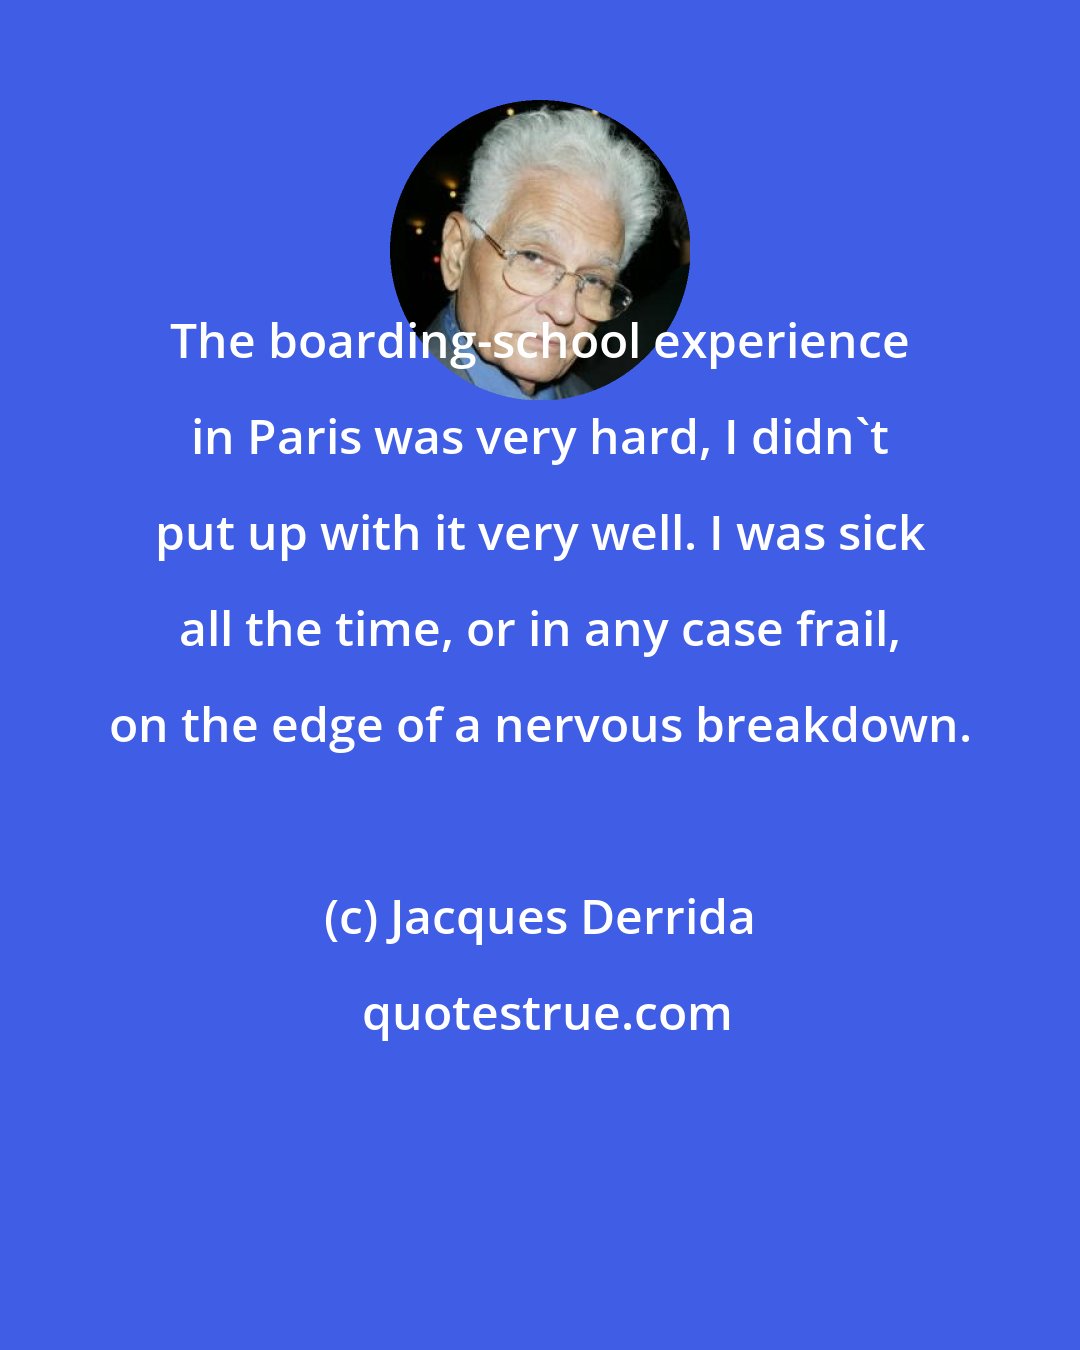 Jacques Derrida: The boarding-school experience in Paris was very hard, I didn't put up with it very well. I was sick all the time, or in any case frail, on the edge of a nervous breakdown.